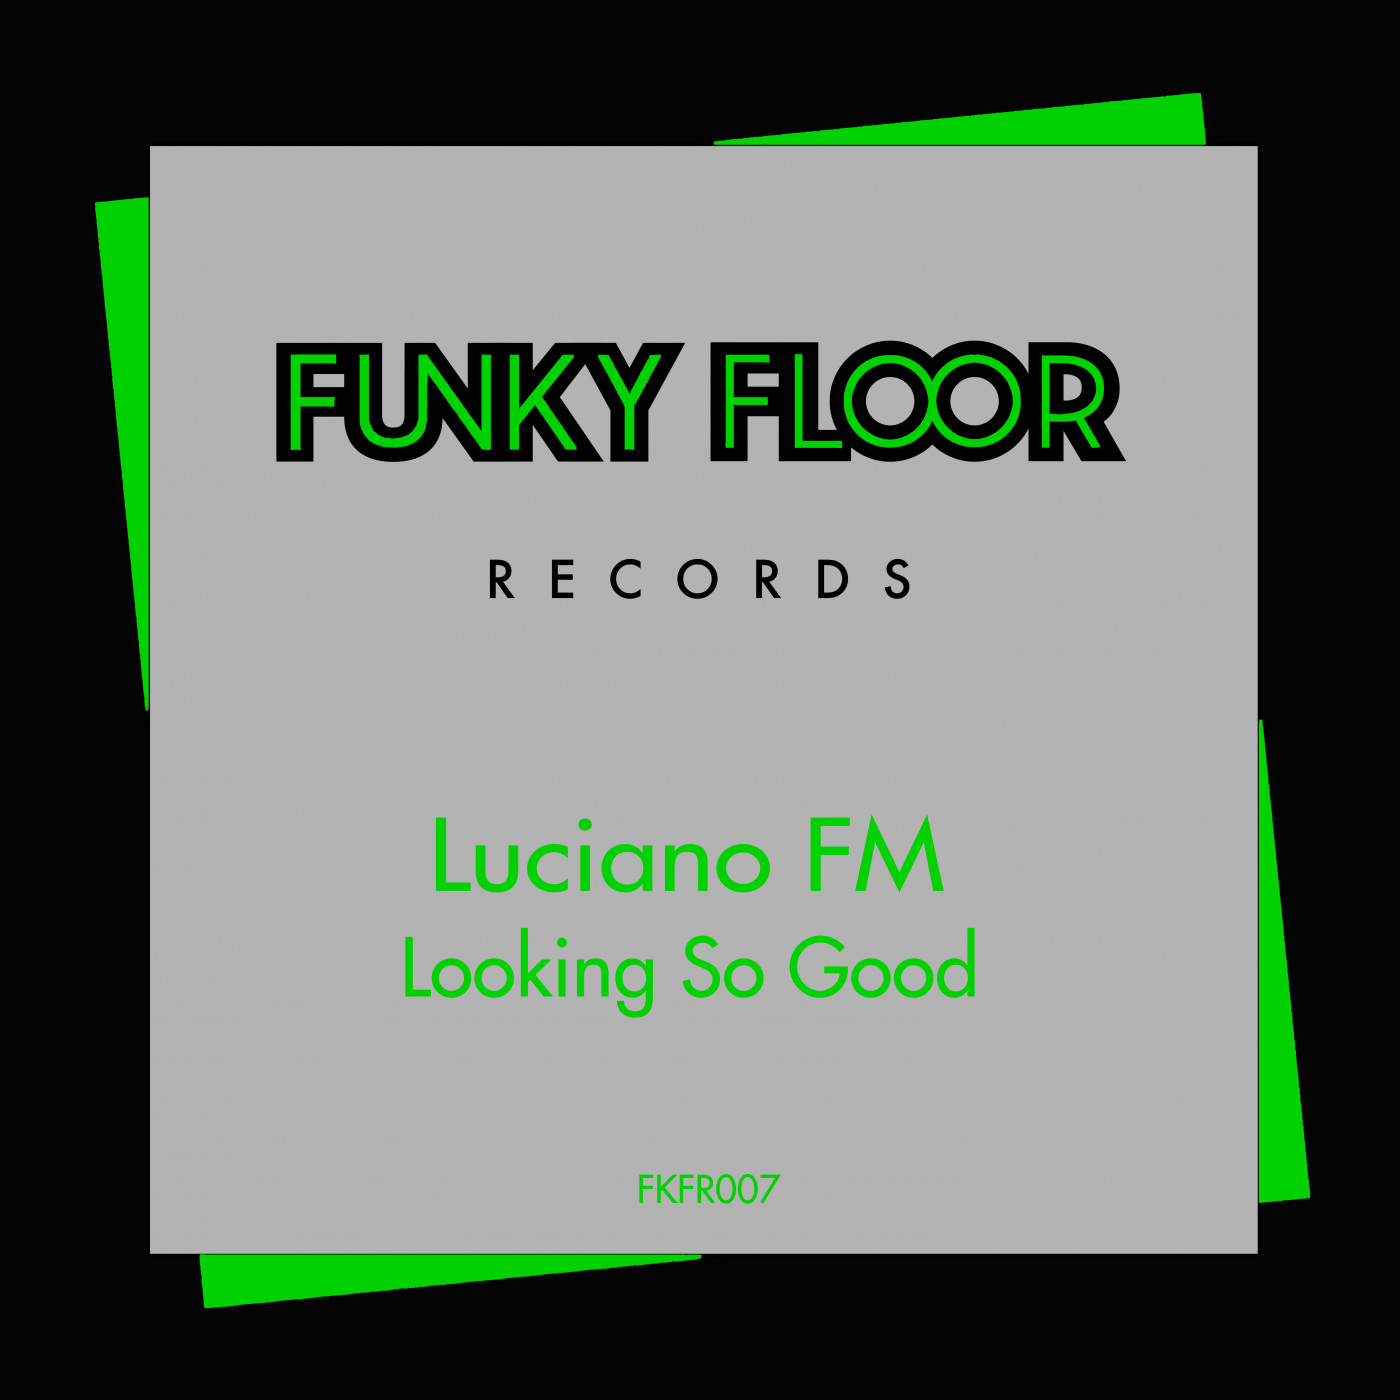 Luciano FM - Looking So Good / Funky Floor Records